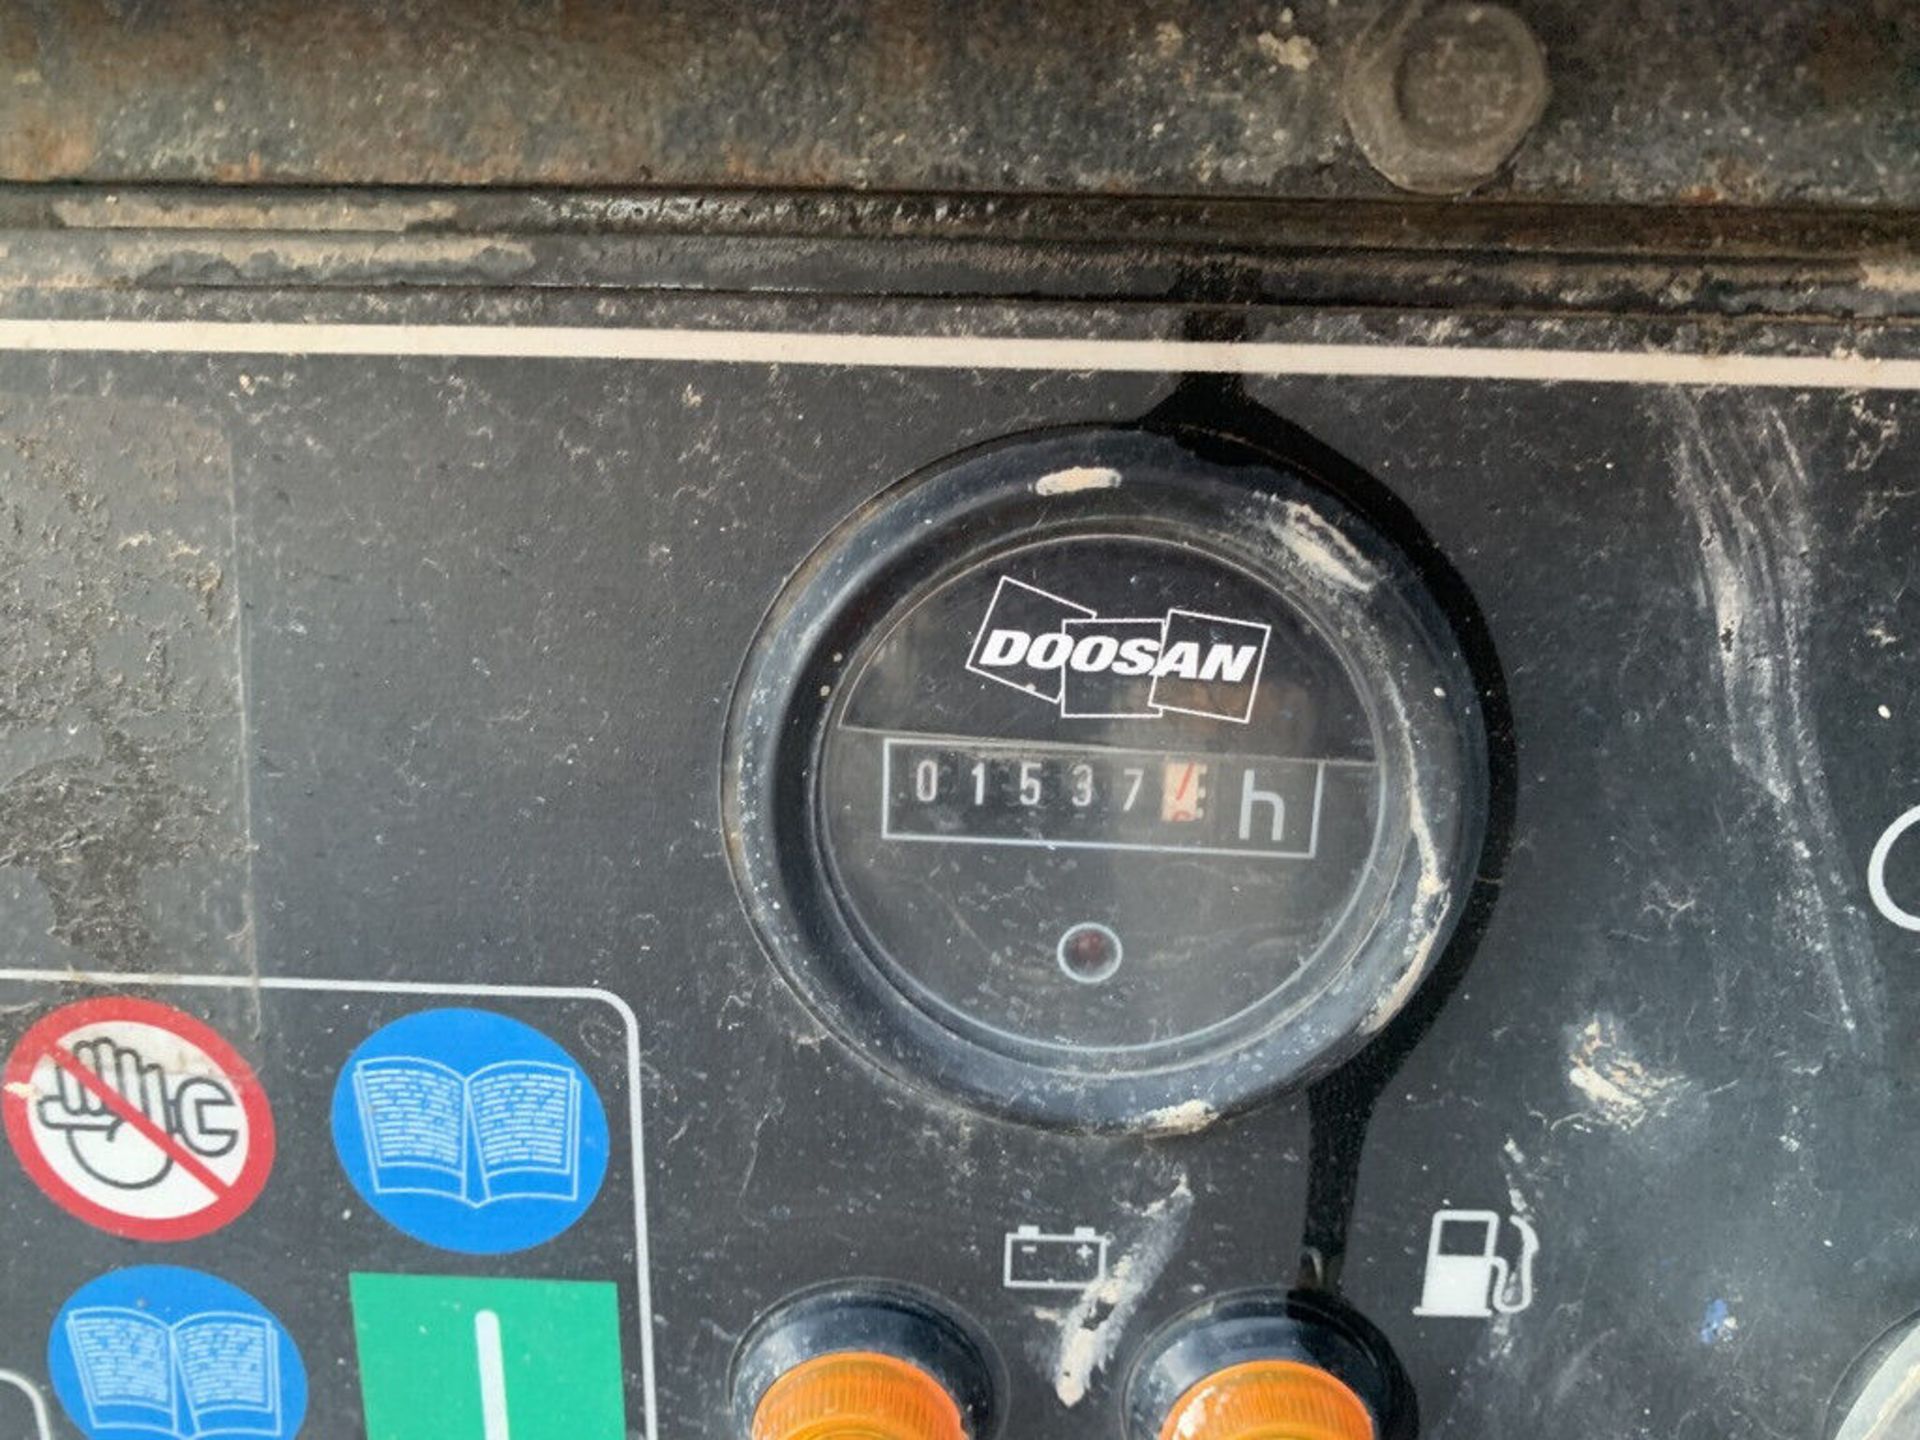 2015 DOOSAN 7/41 COMPRESSOR: 1537 HOURS OF RELIABLE AIR POWER - Image 6 of 10